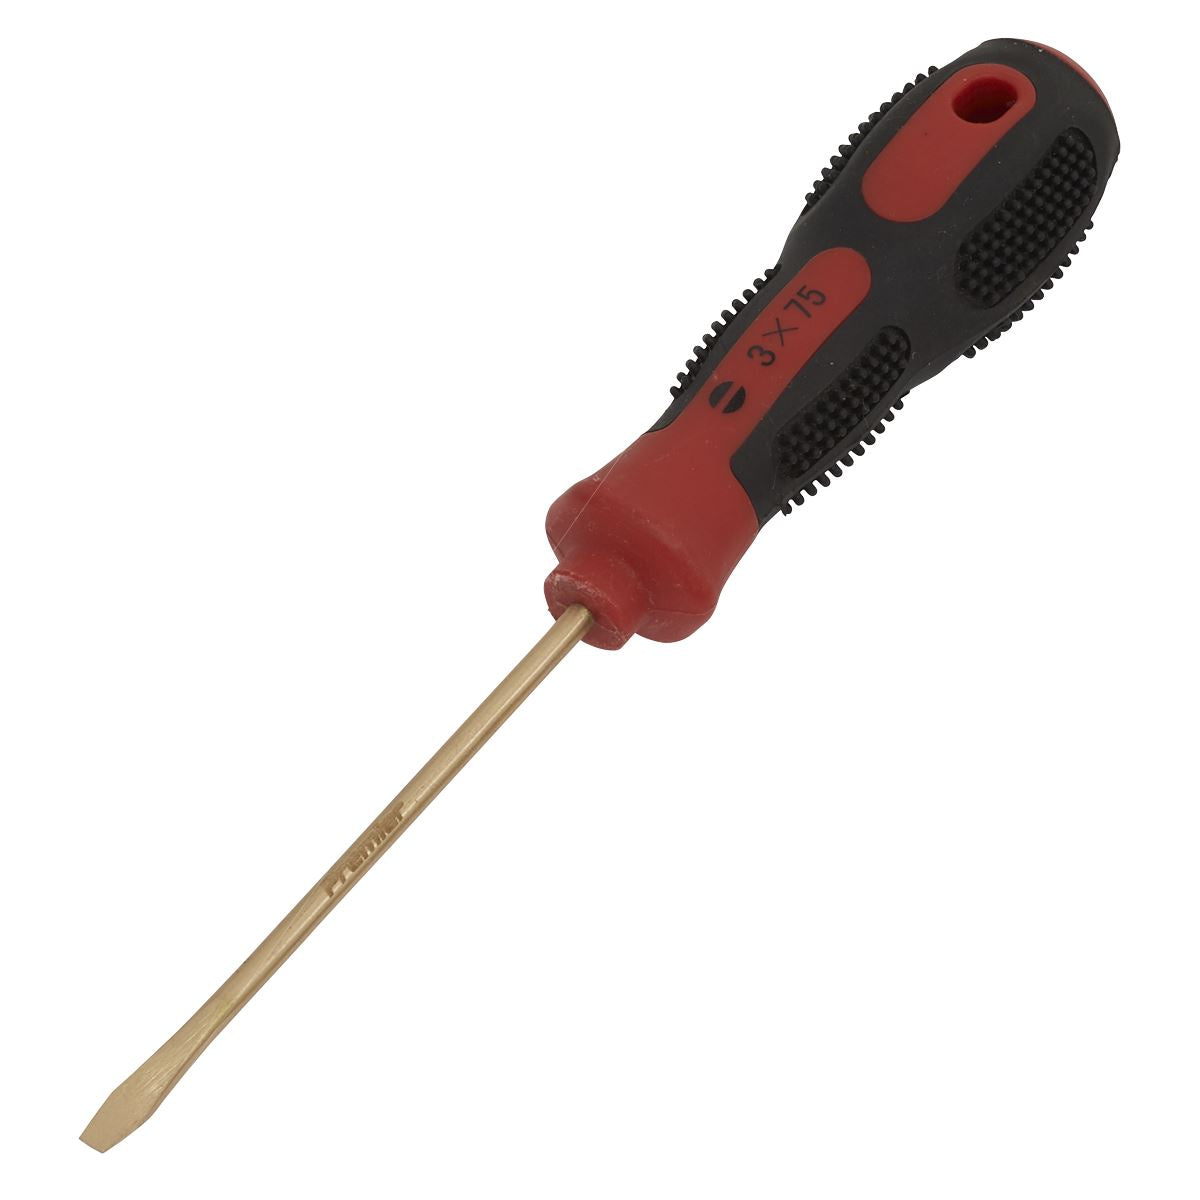 Sealey Premier Screwdriver Slotted 3 x 75mm - Non-Sparking